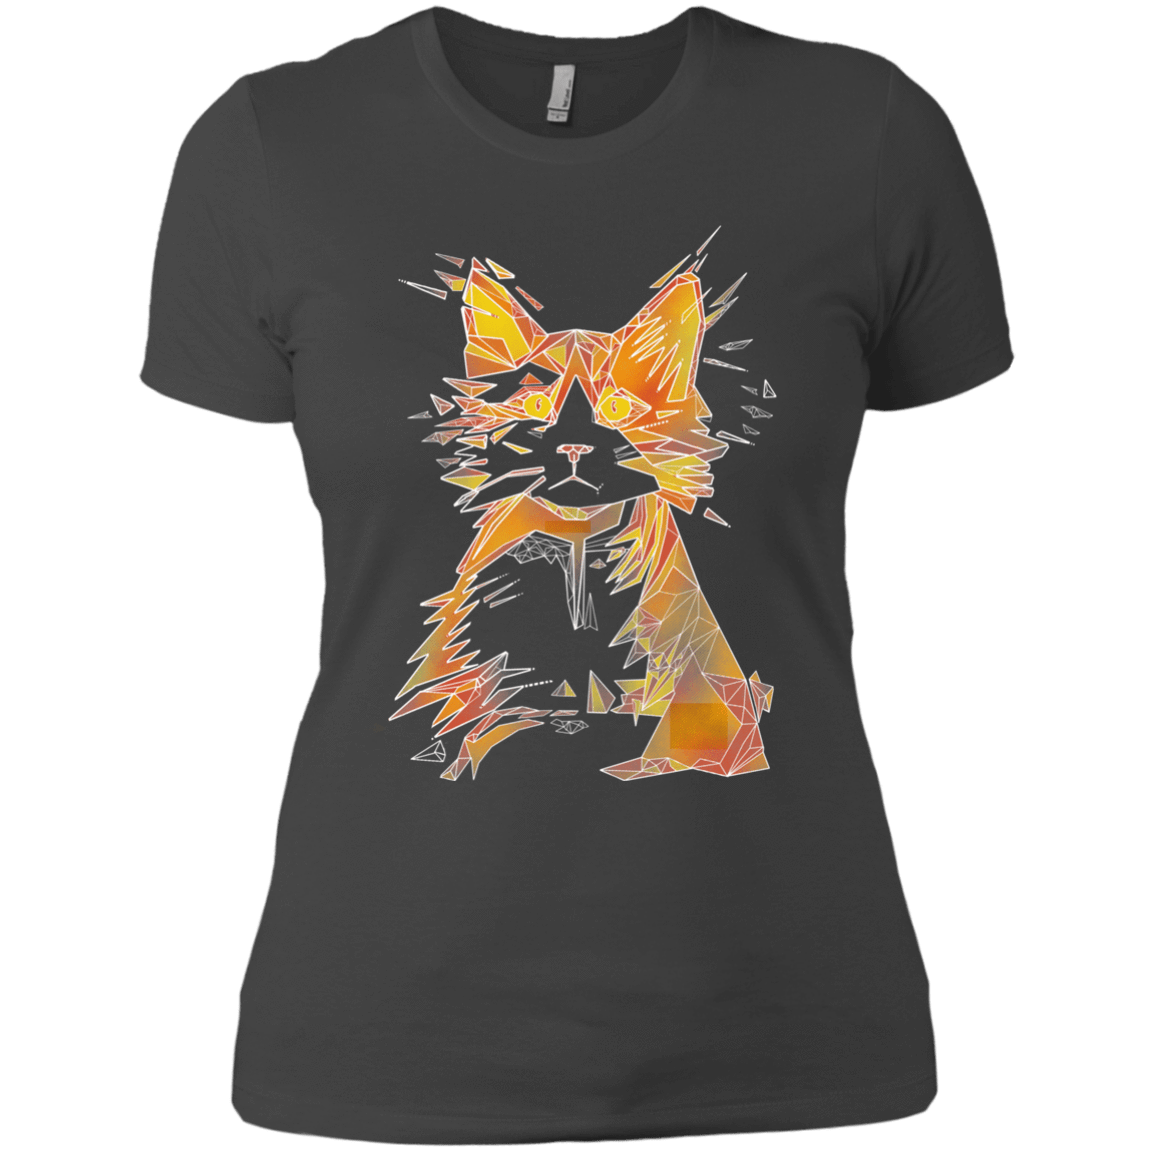 T-Shirts Heavy Metal / X-Small Scattered Women's Premium T-Shirt